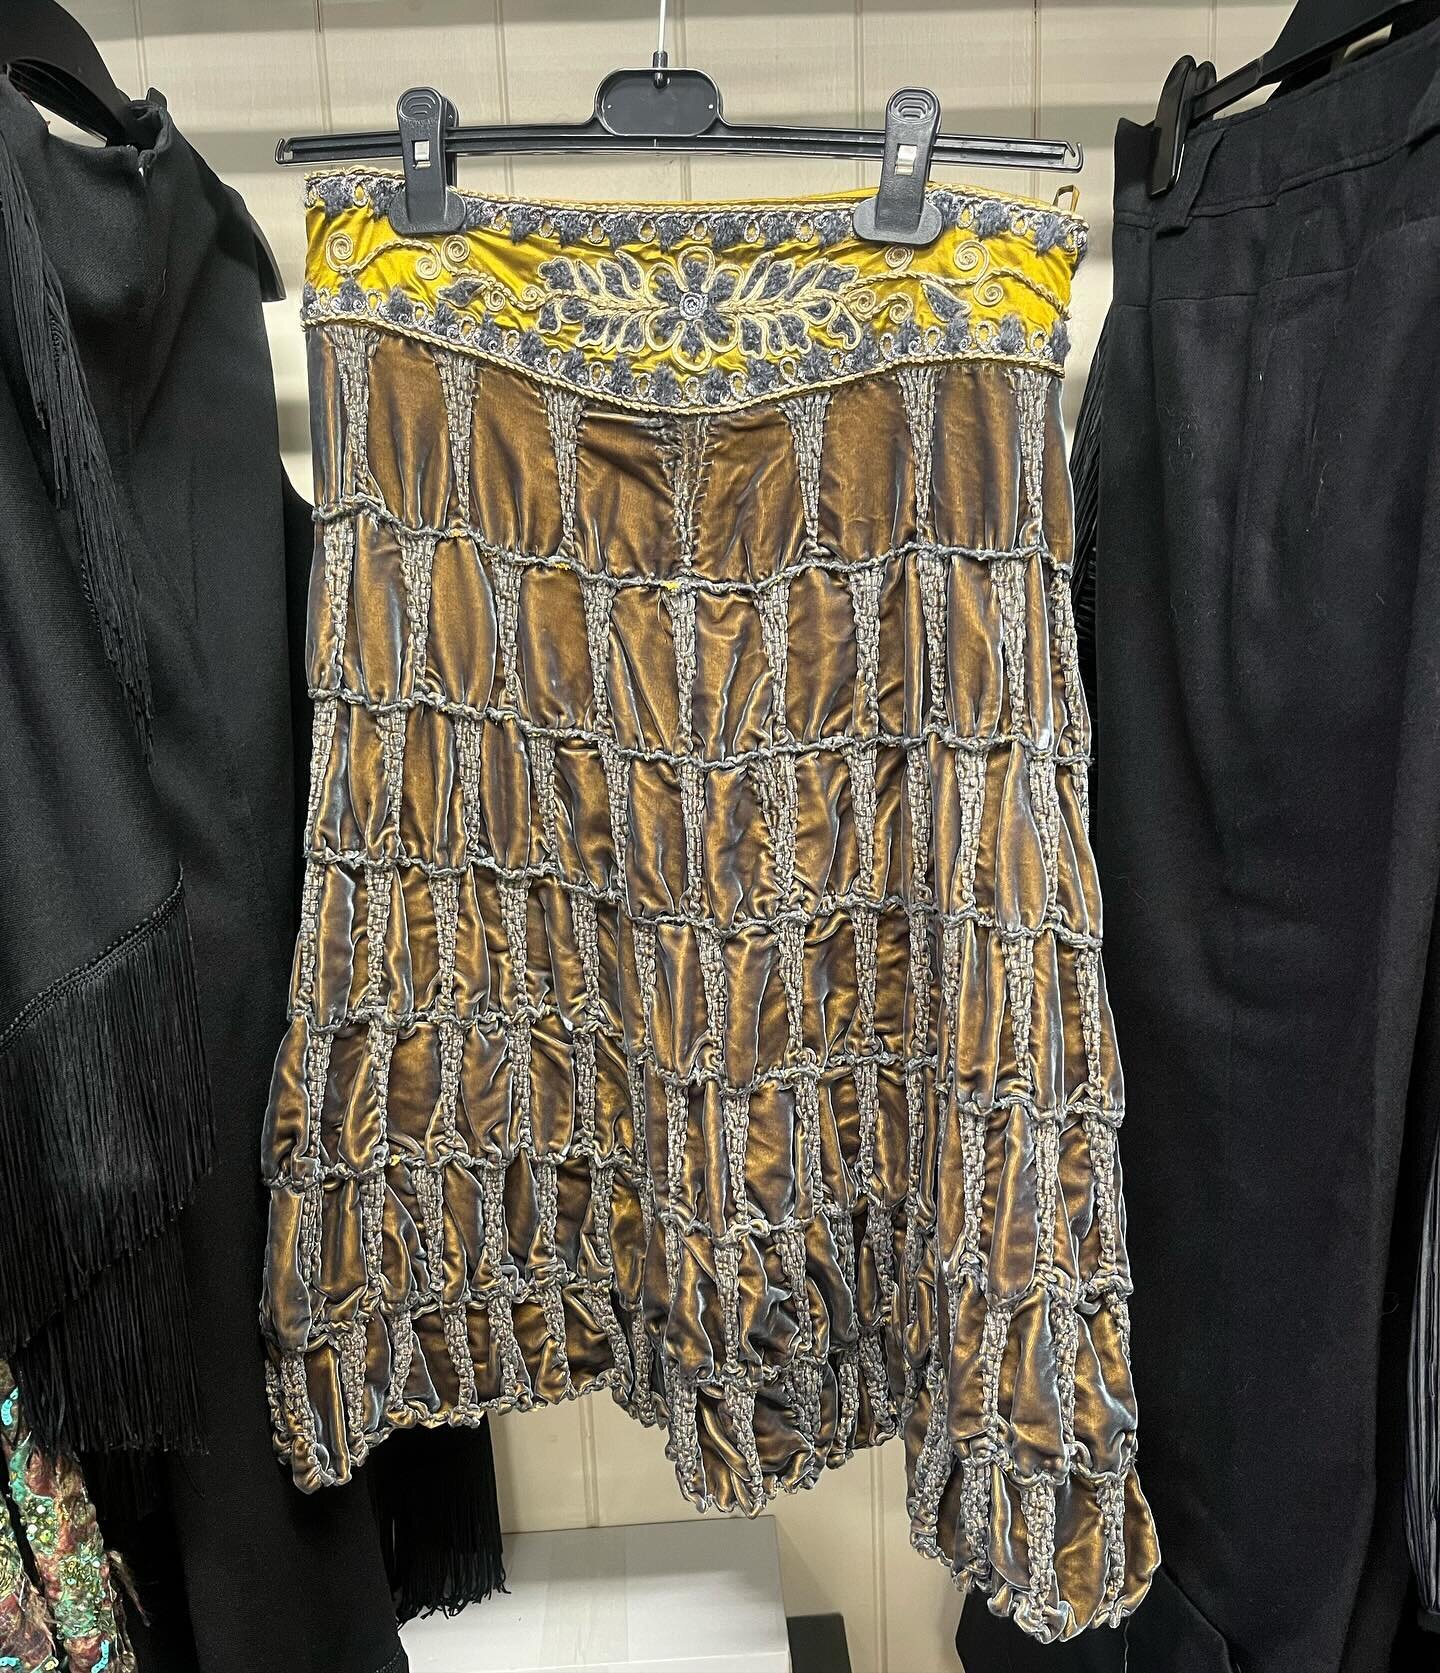 DM FOR PRICE!!!

✨Luxurious Pazuki bronze and grey velvet skirt with mustard and grey embroidered waistband✨

^size: small but would fit 10-12

#theretroroom #theretroroomoxford #vintage #vintagefashion #vintageshop #vintageboutique #boutique #shoppi